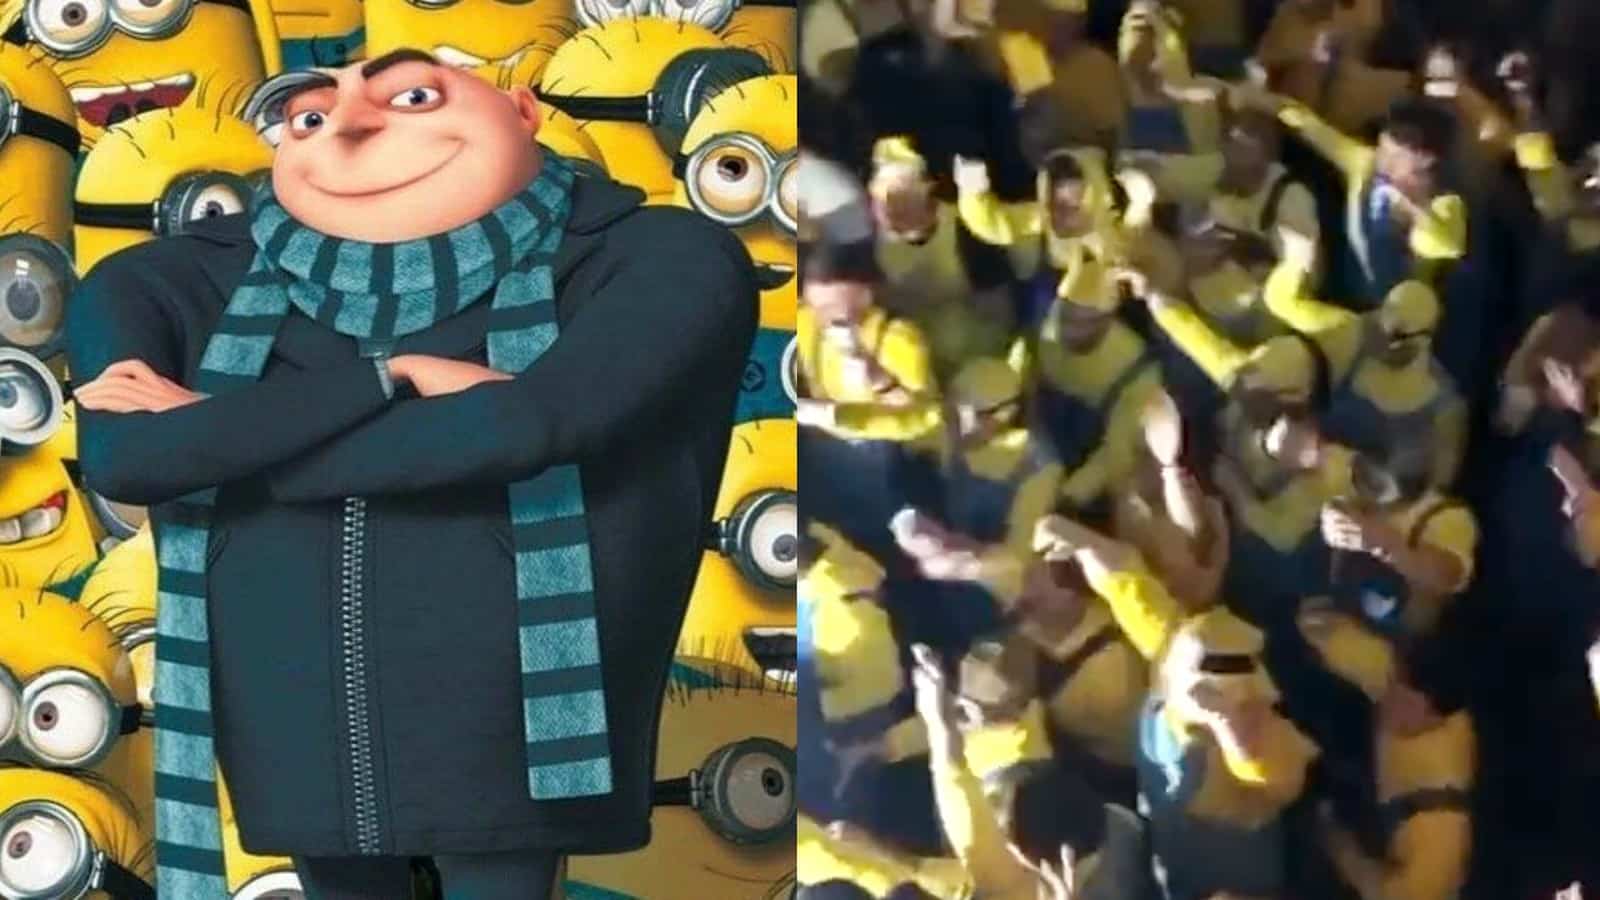 Despicable Me characters next to a group of people dressed as Minions